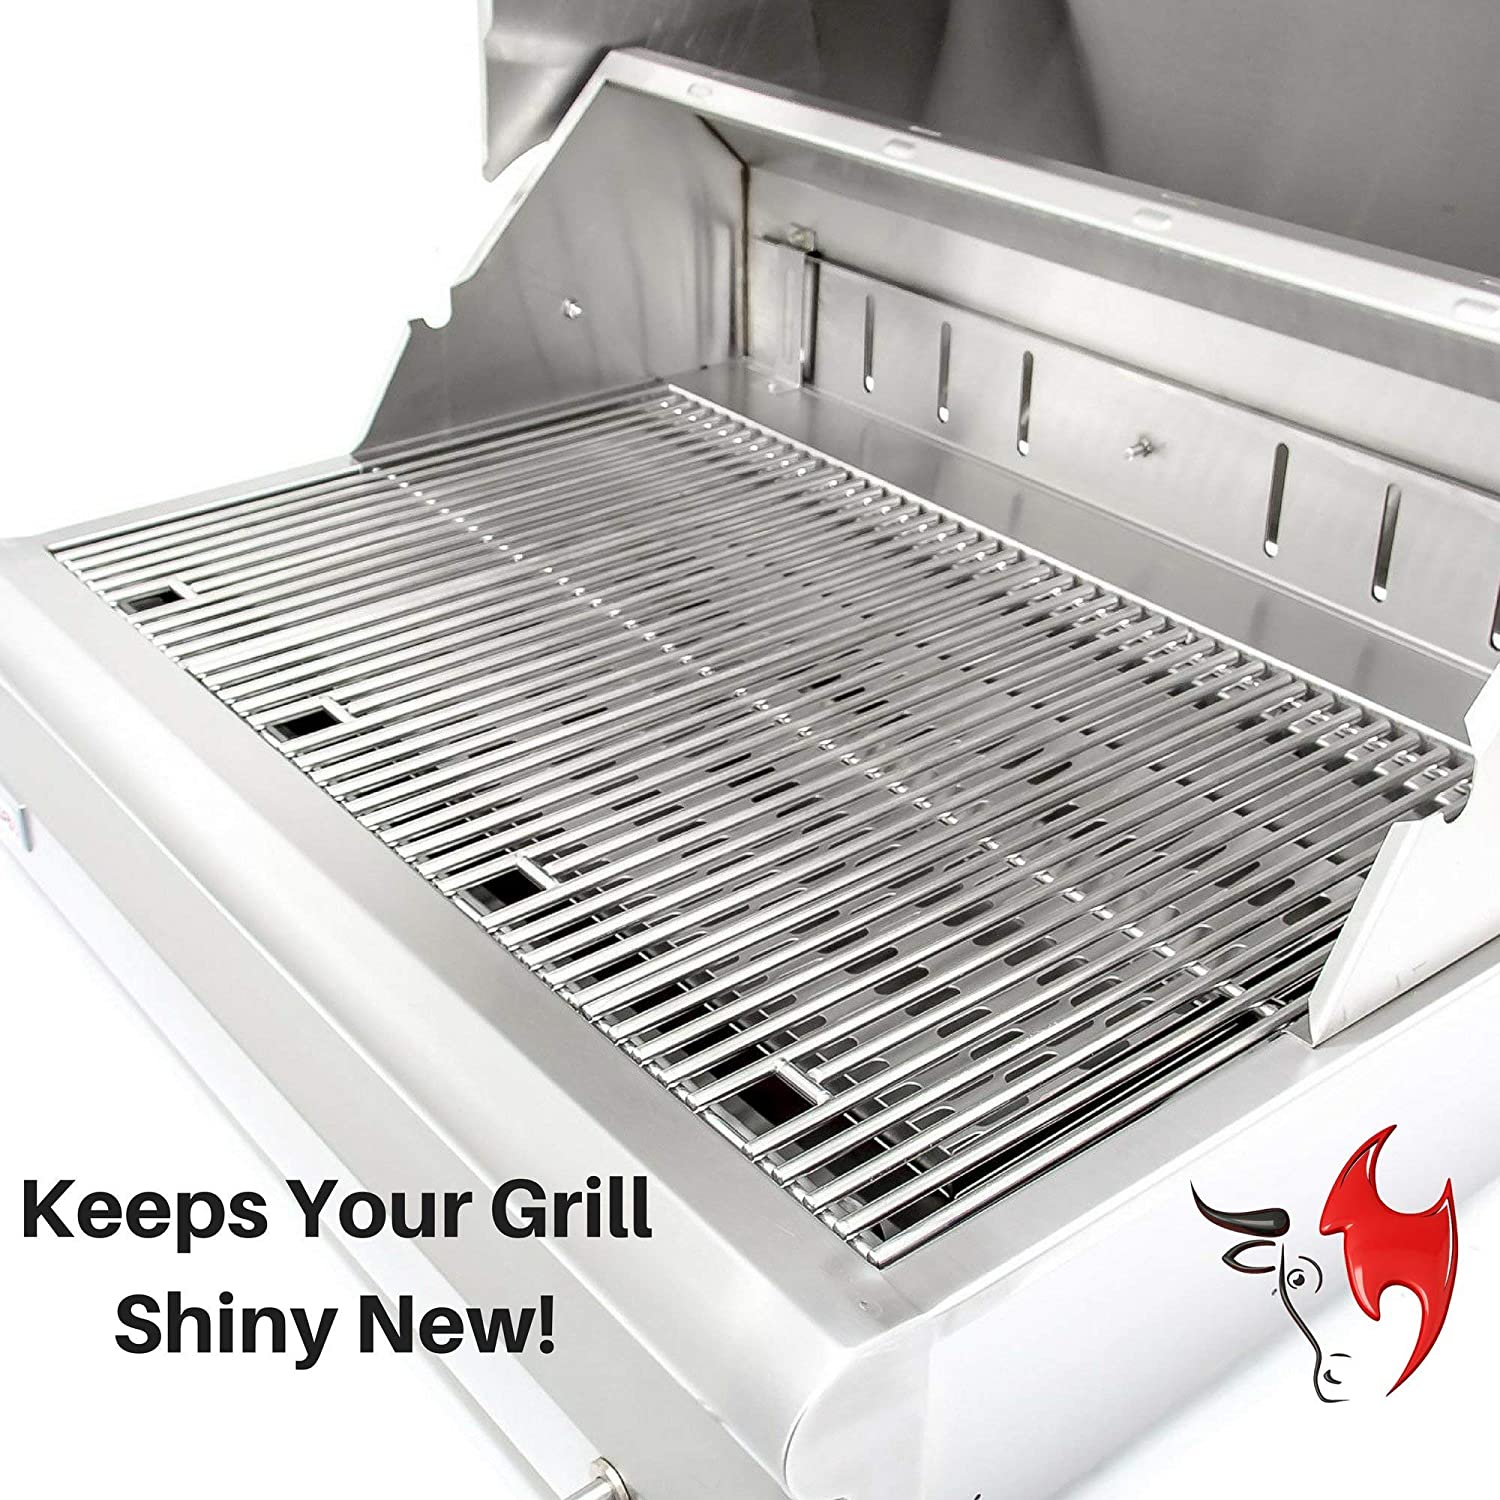 Keep Your BBQ Running Smoothly: Why Cleaning Your Grill is Crucial